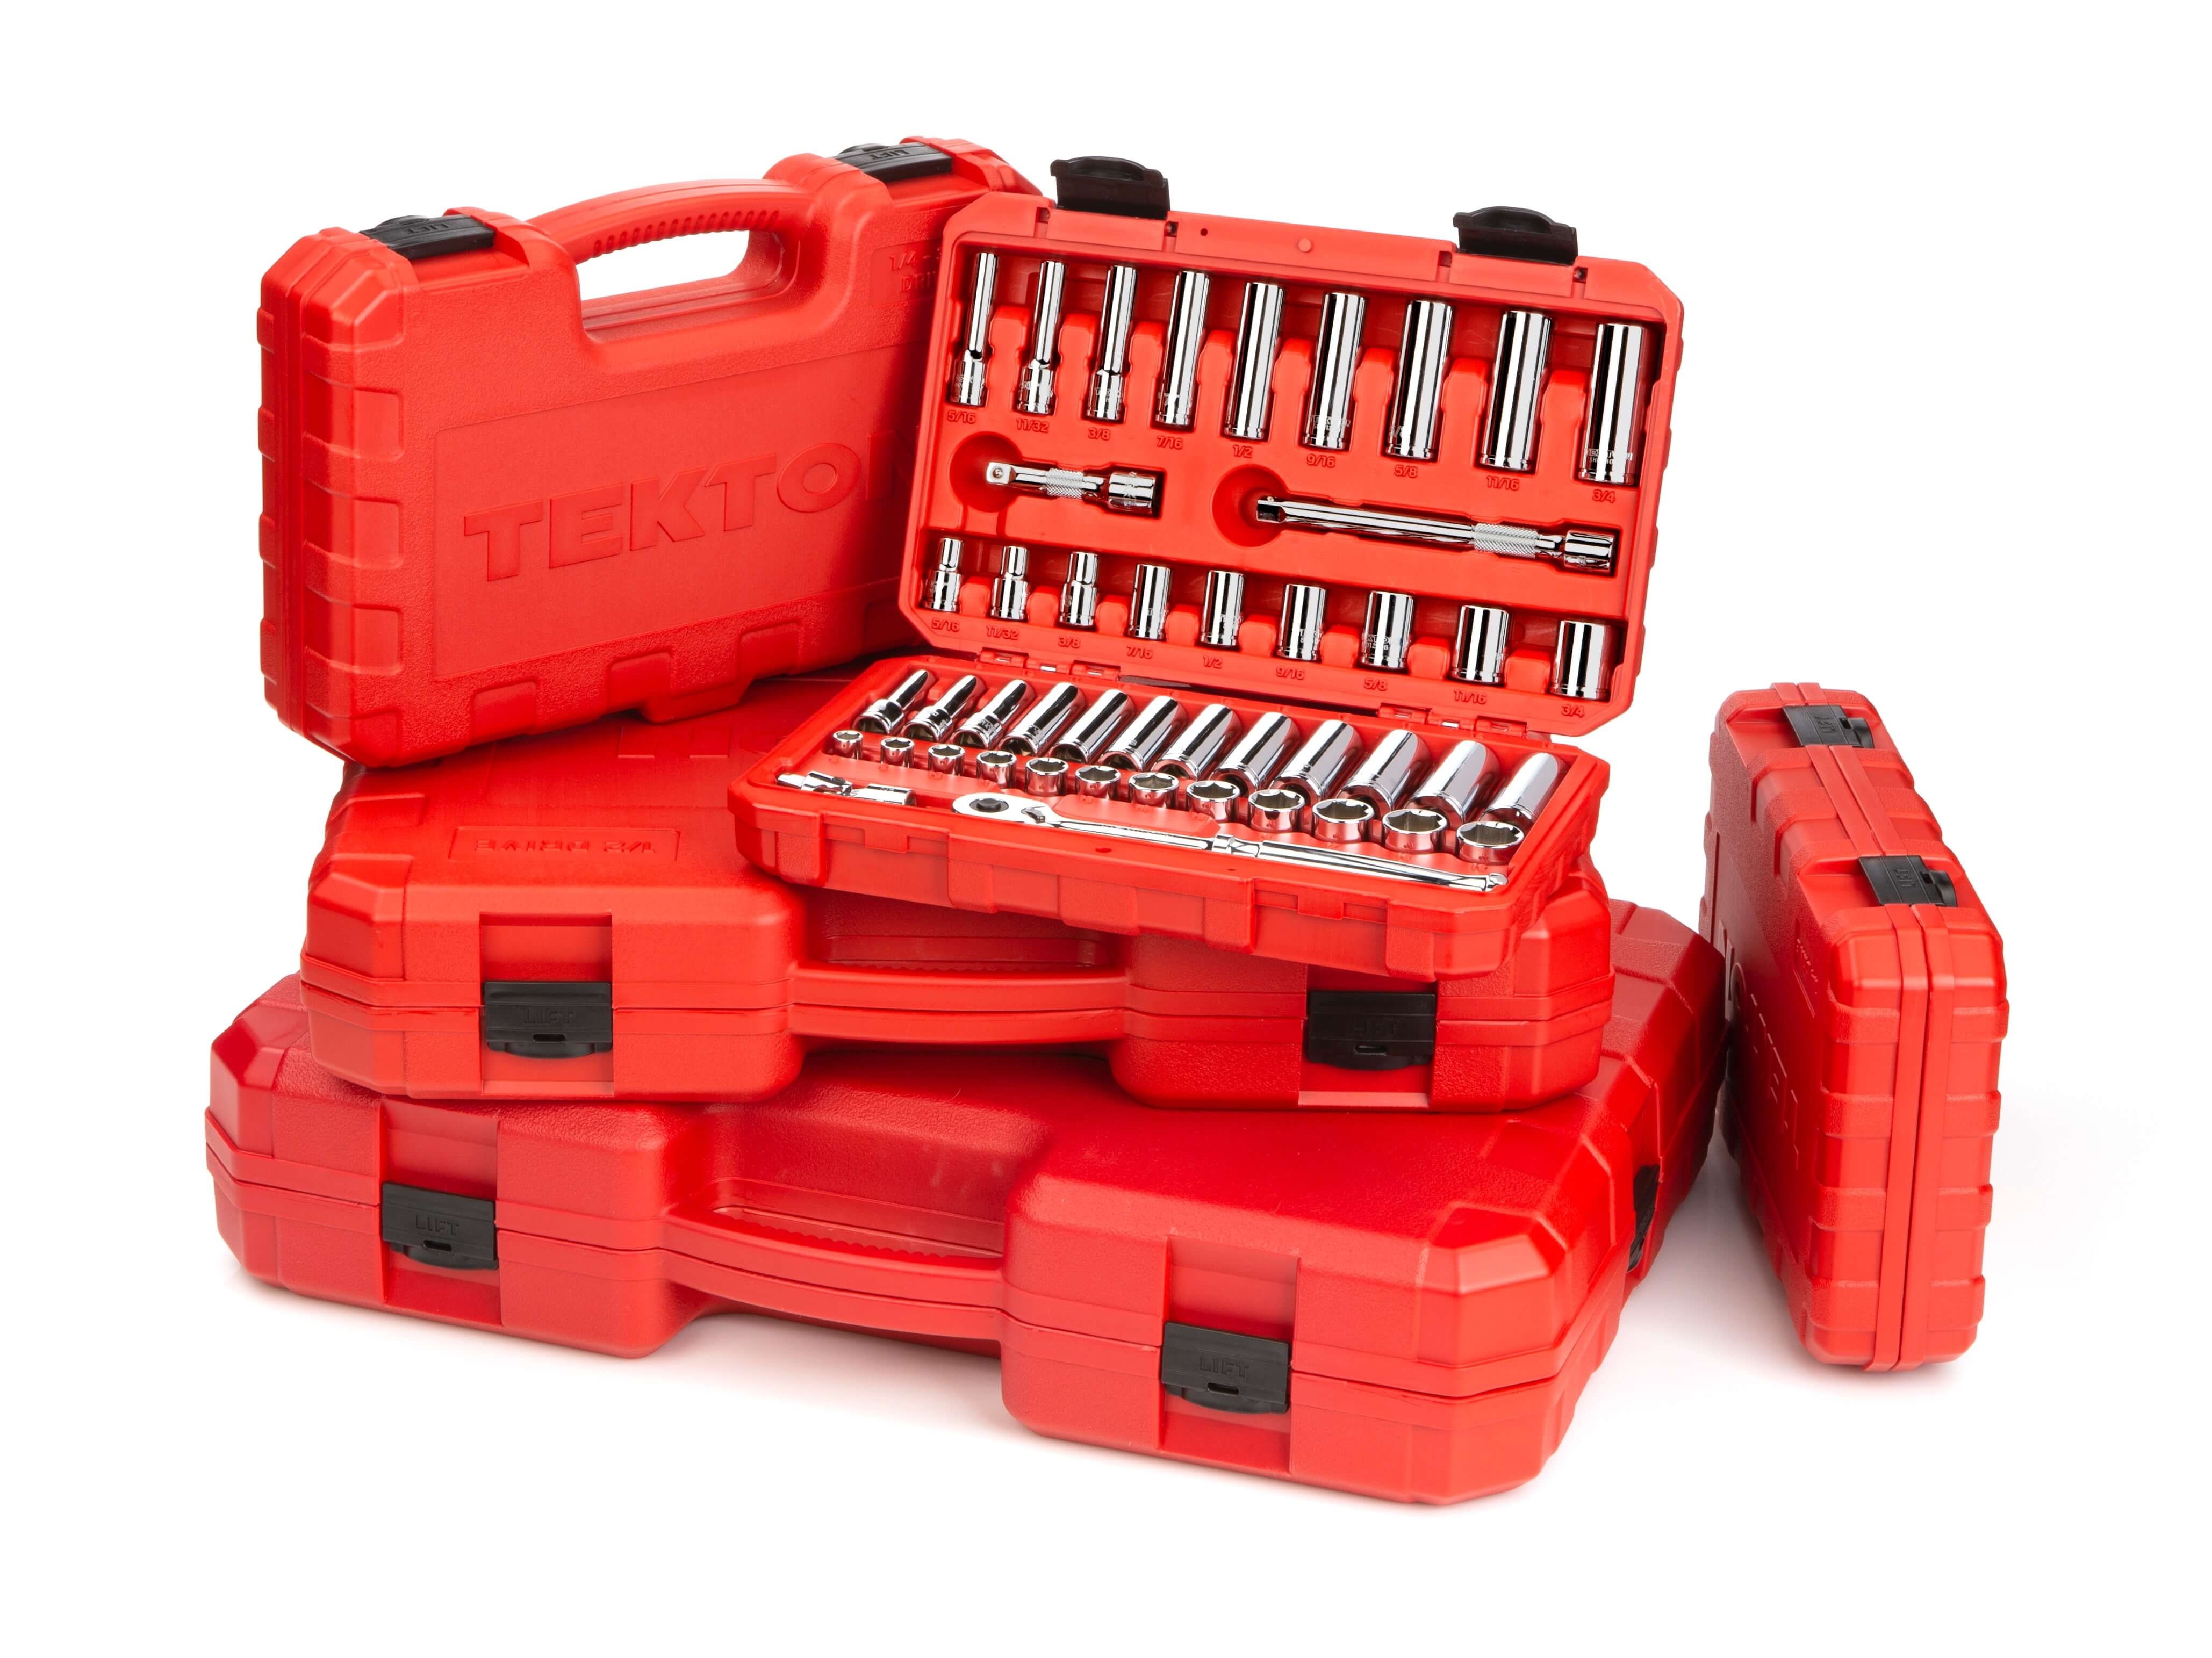 A series of red toolboxes of various sizes. 